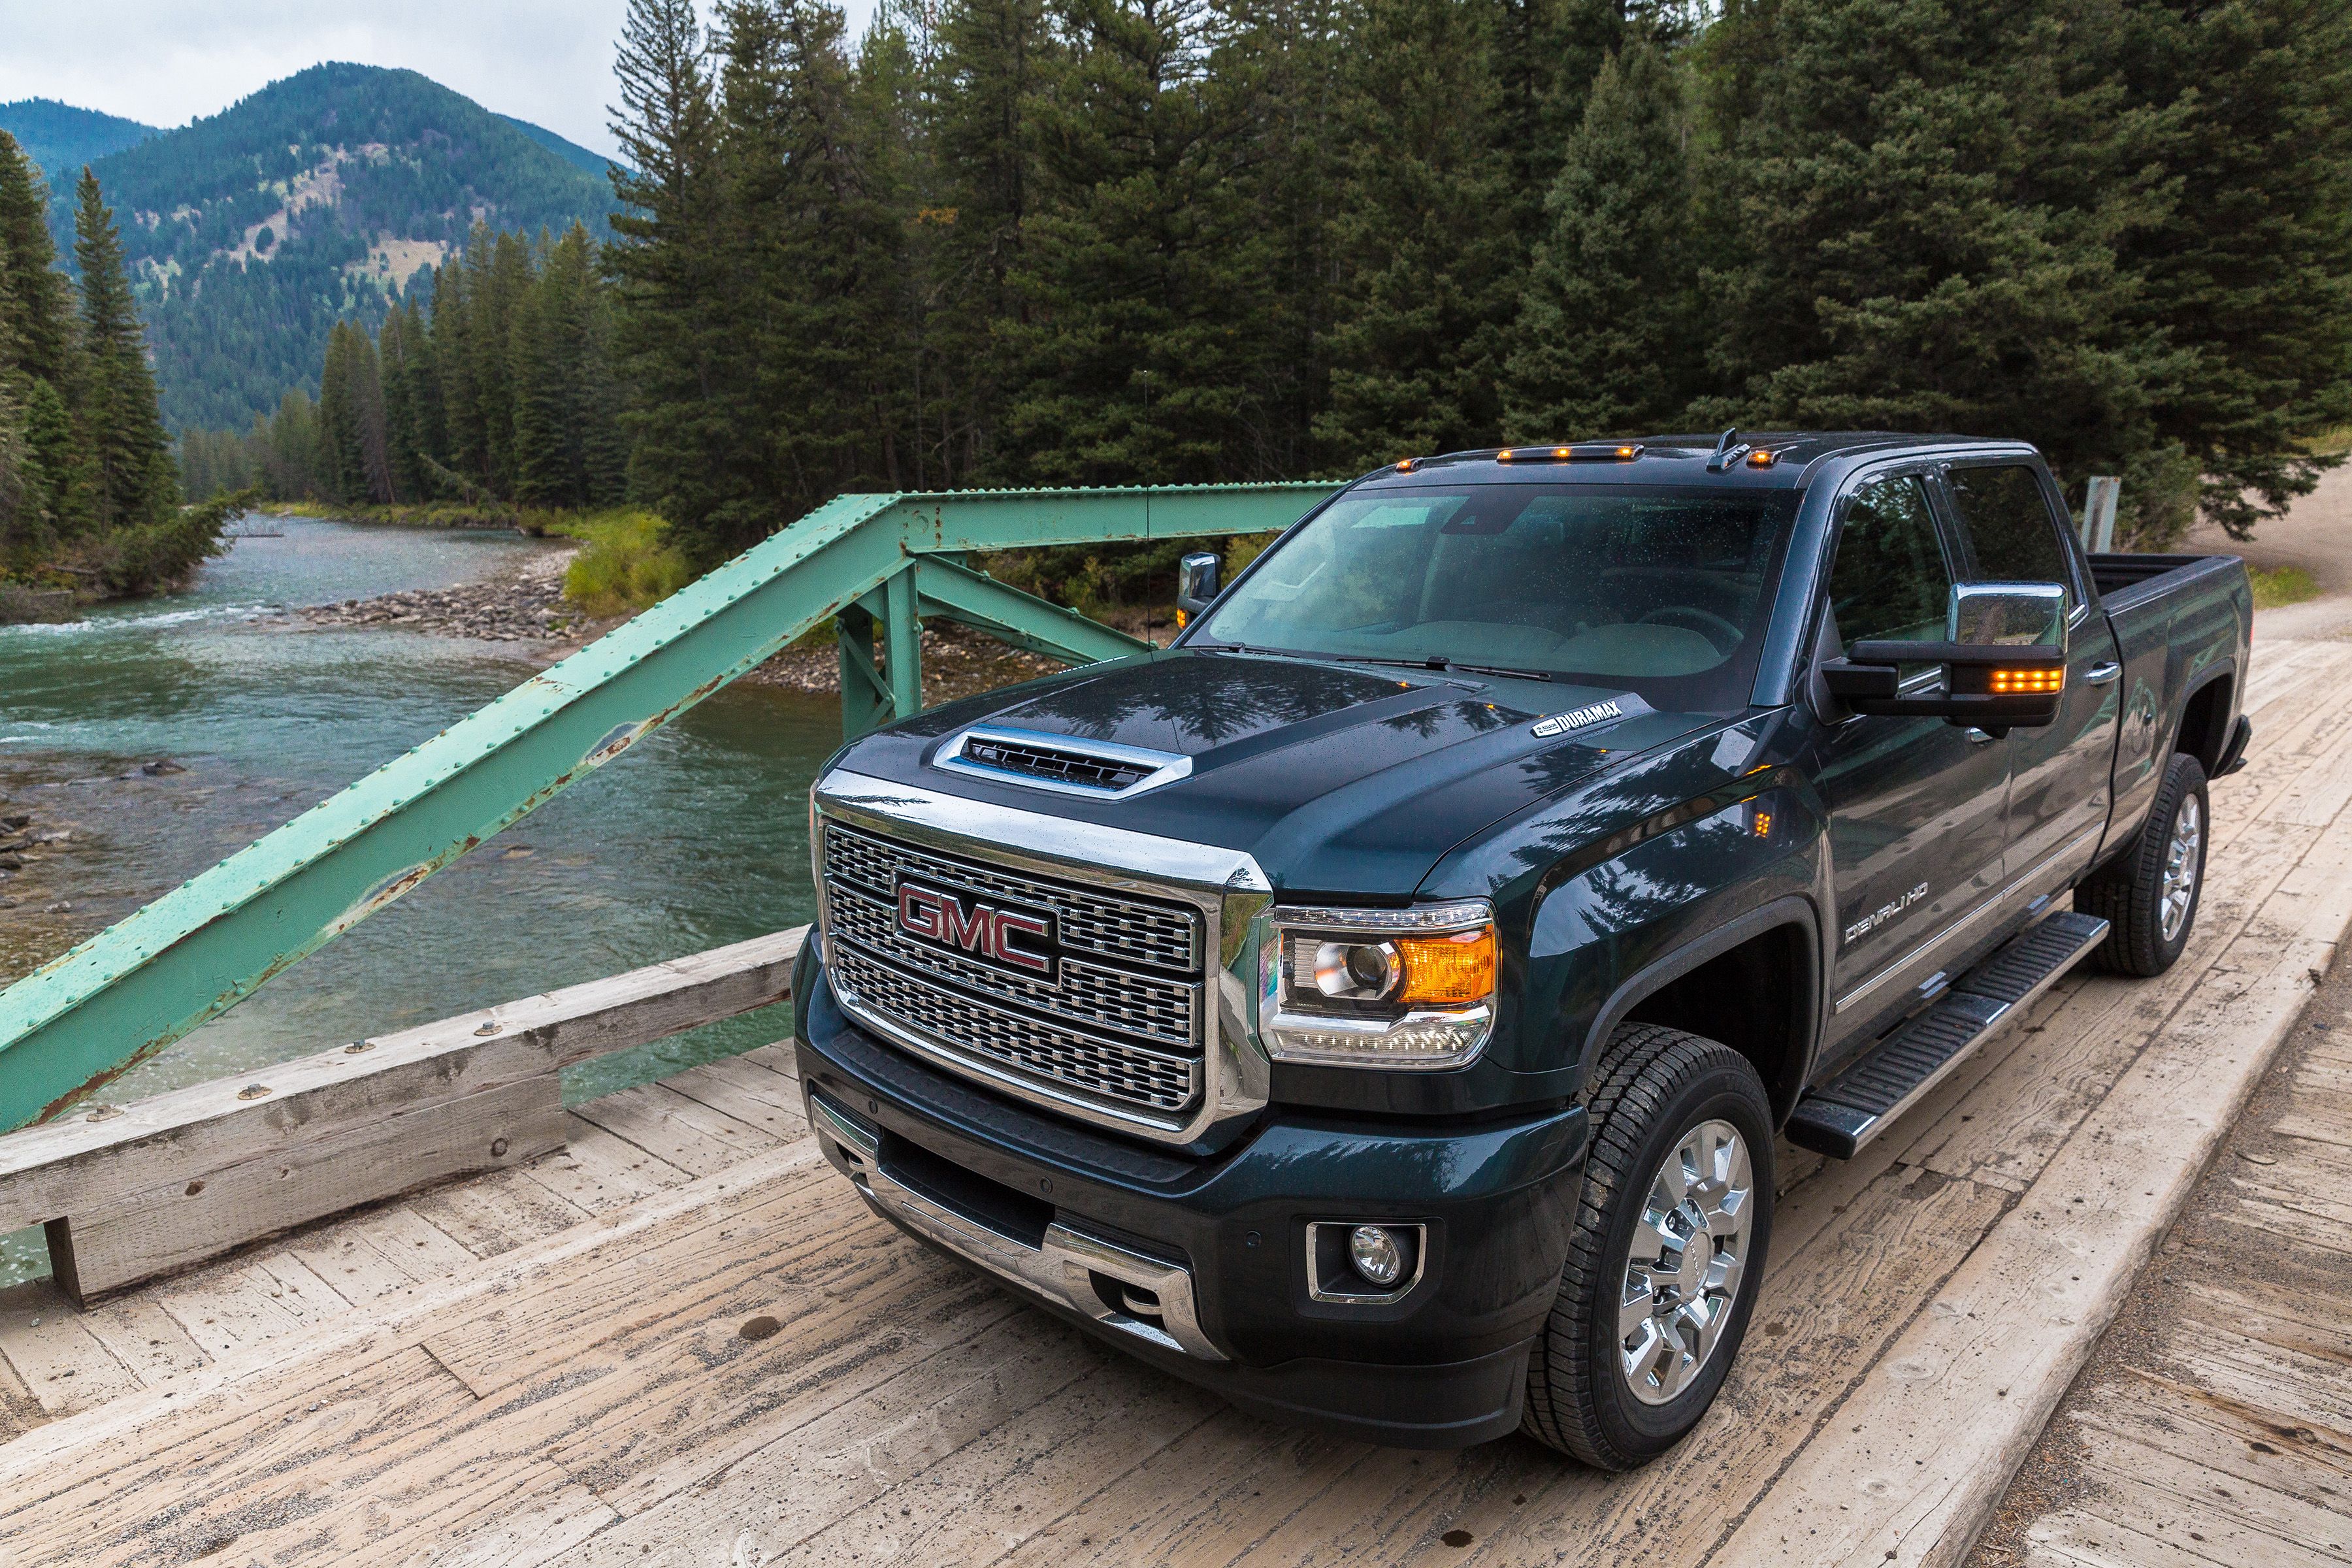 2021 GMC is Slashing up to $4,500 off the GMC Sierra HD in October 2018